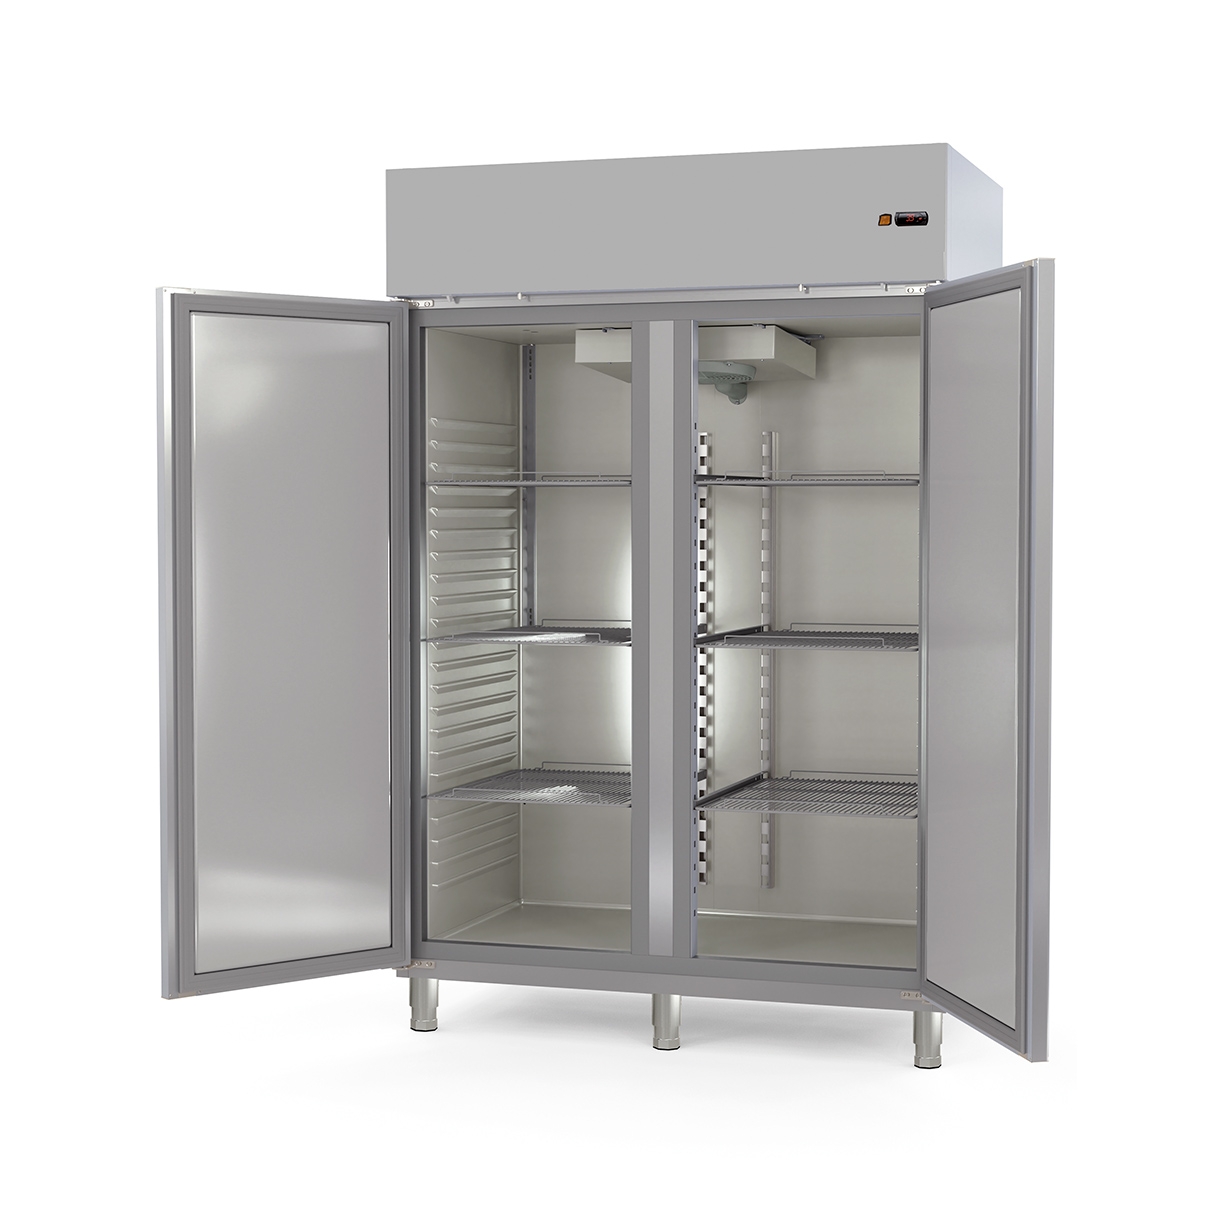 GASTRONORM Freezing Cabinet AGND-140